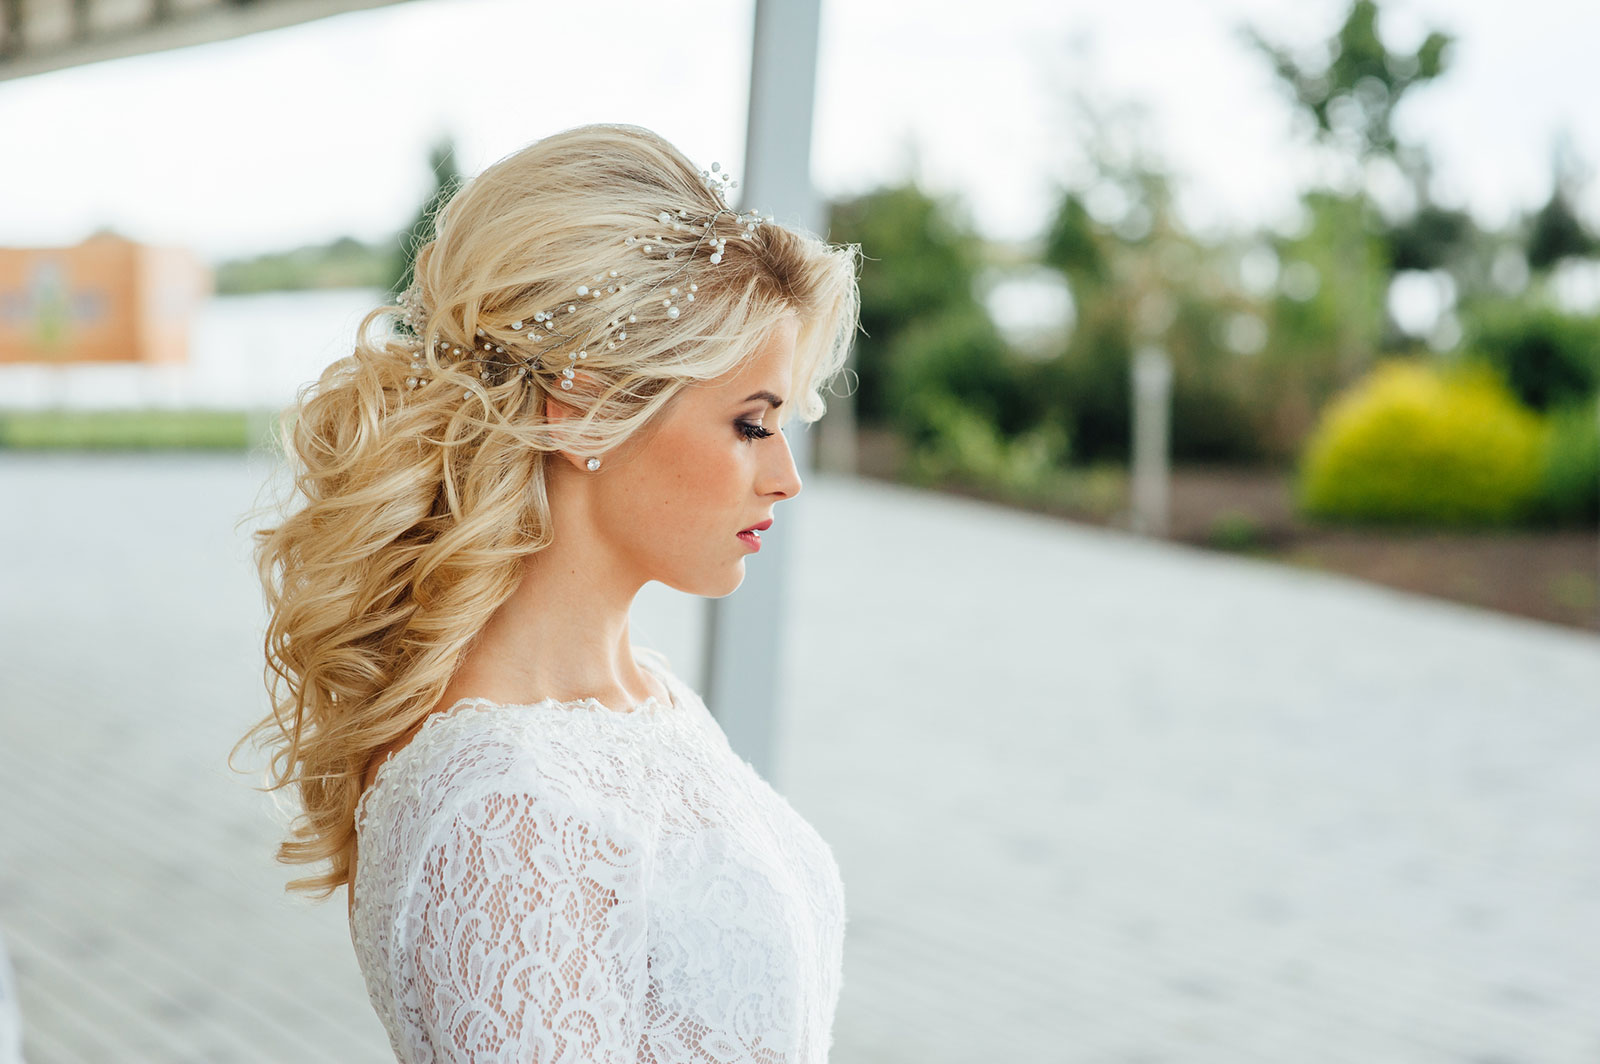 Long pinned and tied back Wedding hairstyle for women